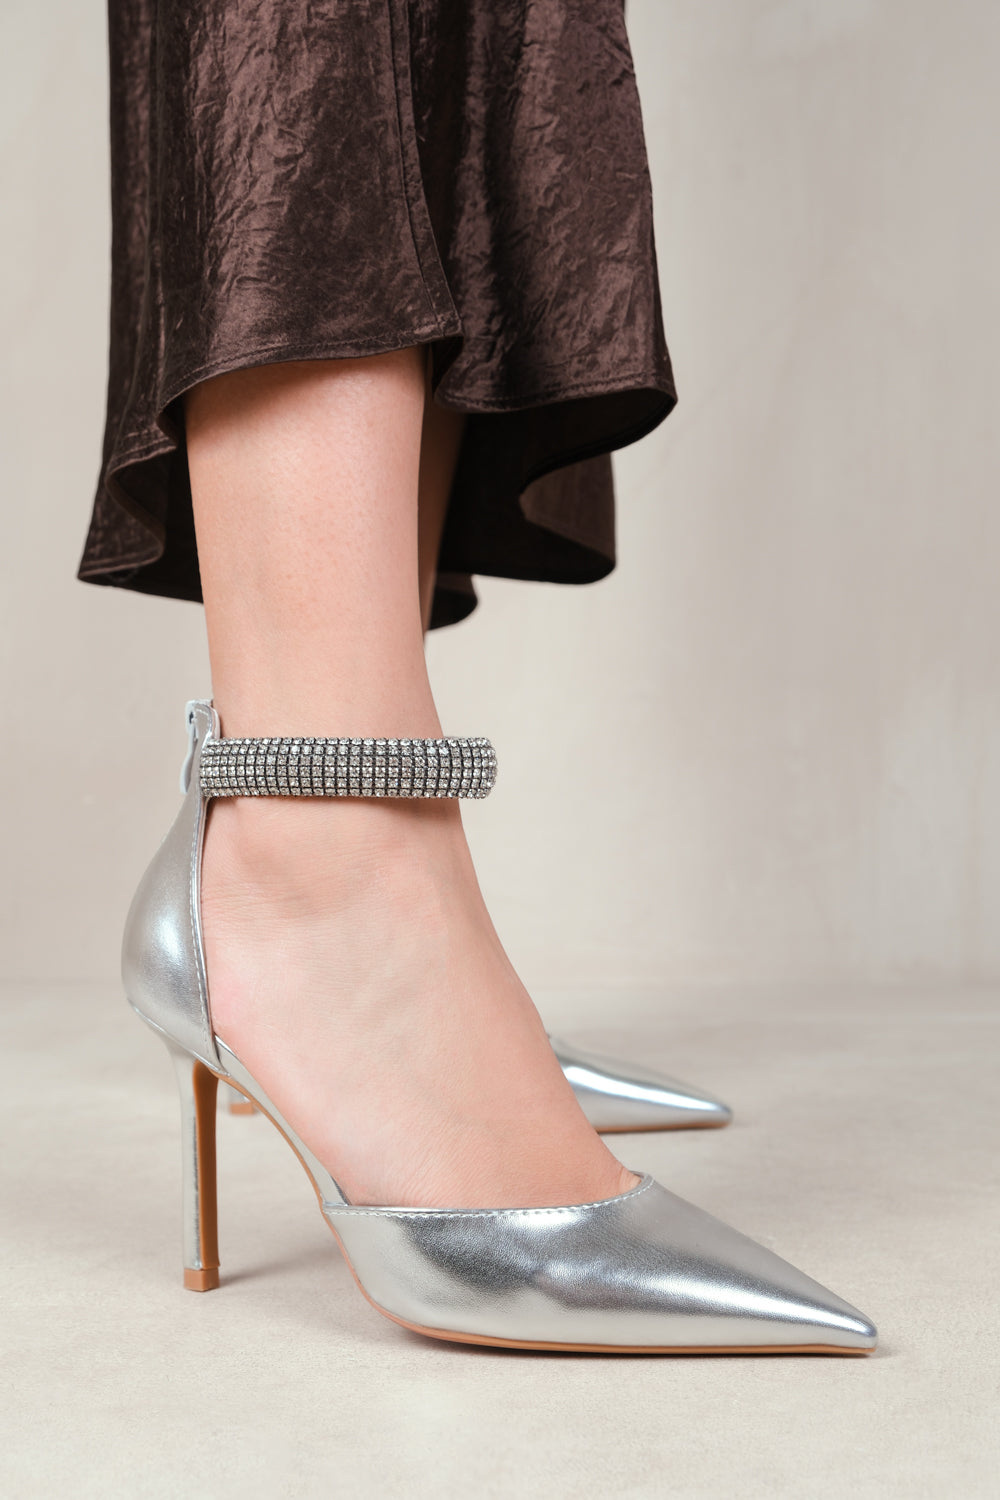 SAPPHIRE POINTED TOE HIGH HEELS WITH DIAMANTE DETAIL ANKLE STRAP IN SILVER METALLIC